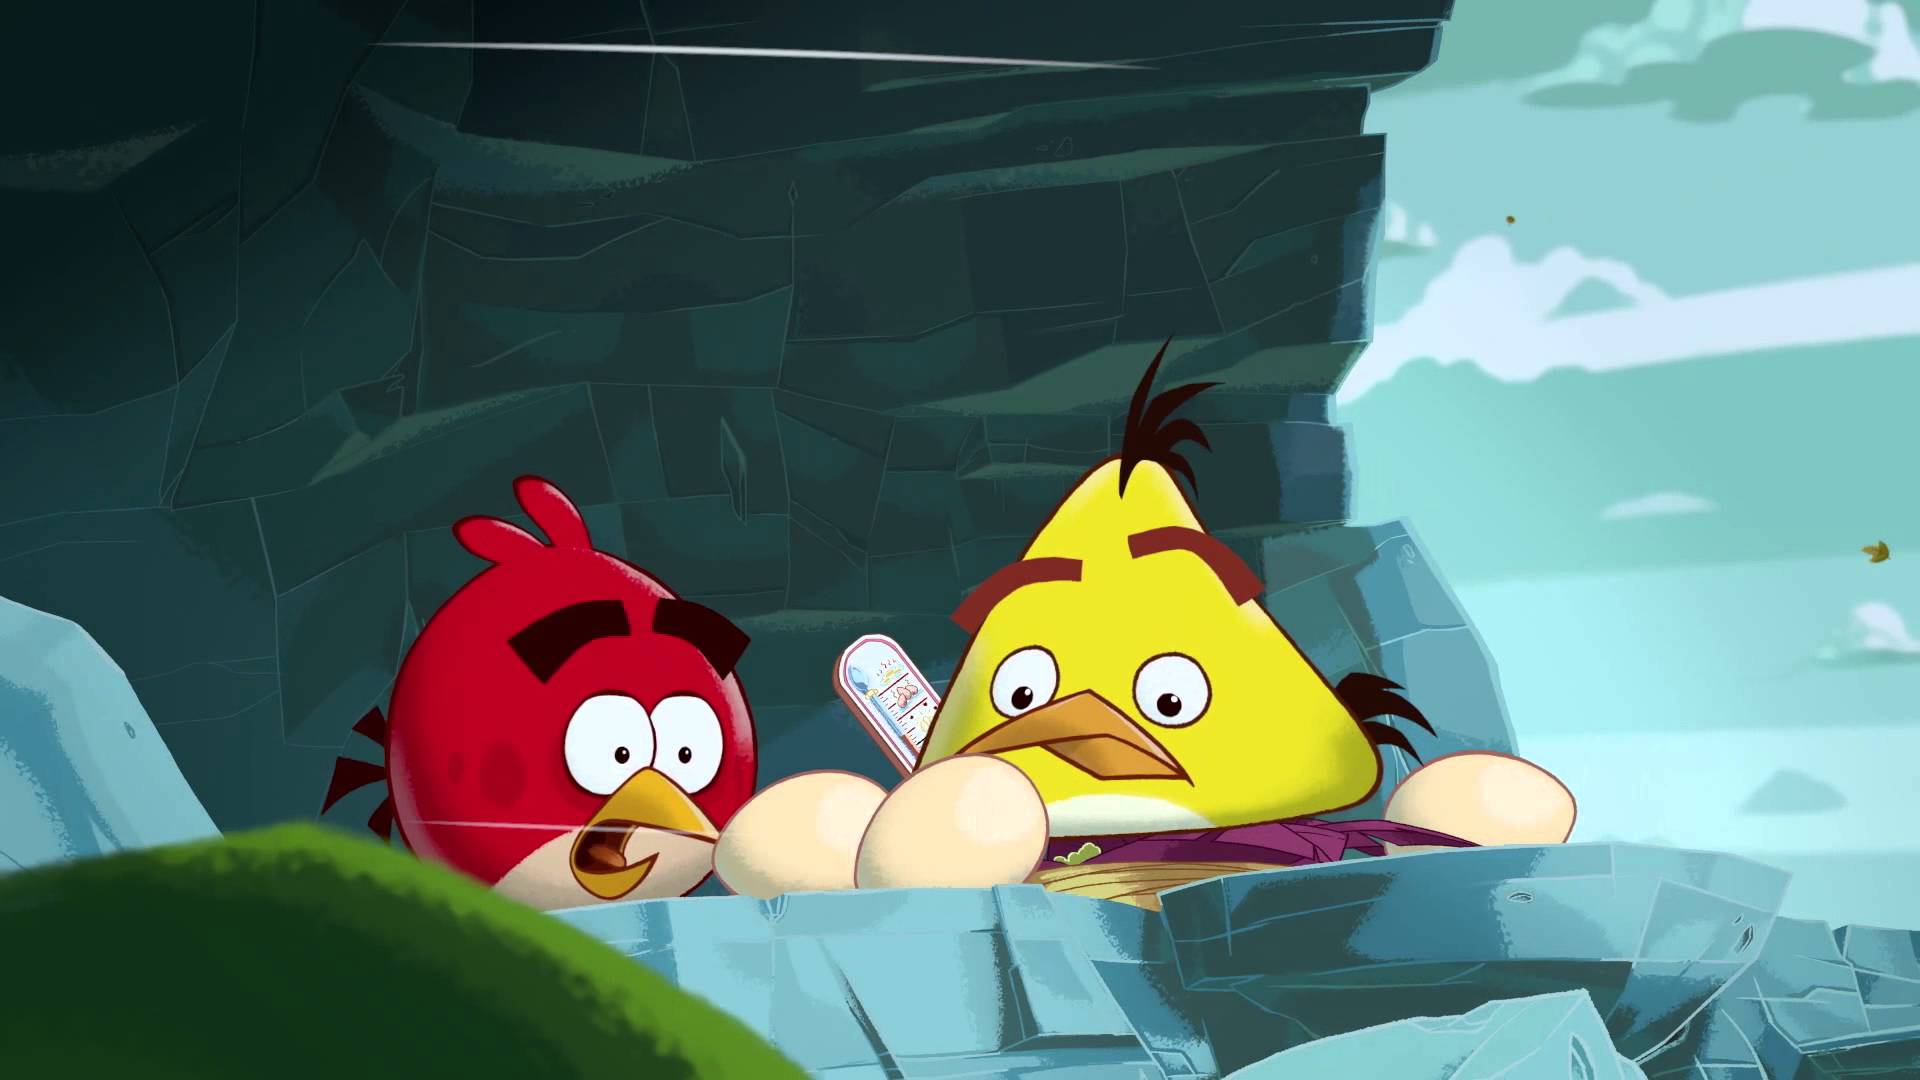 Angry birds toons episode. Angry Birds toons. Angry Birds toons 2.